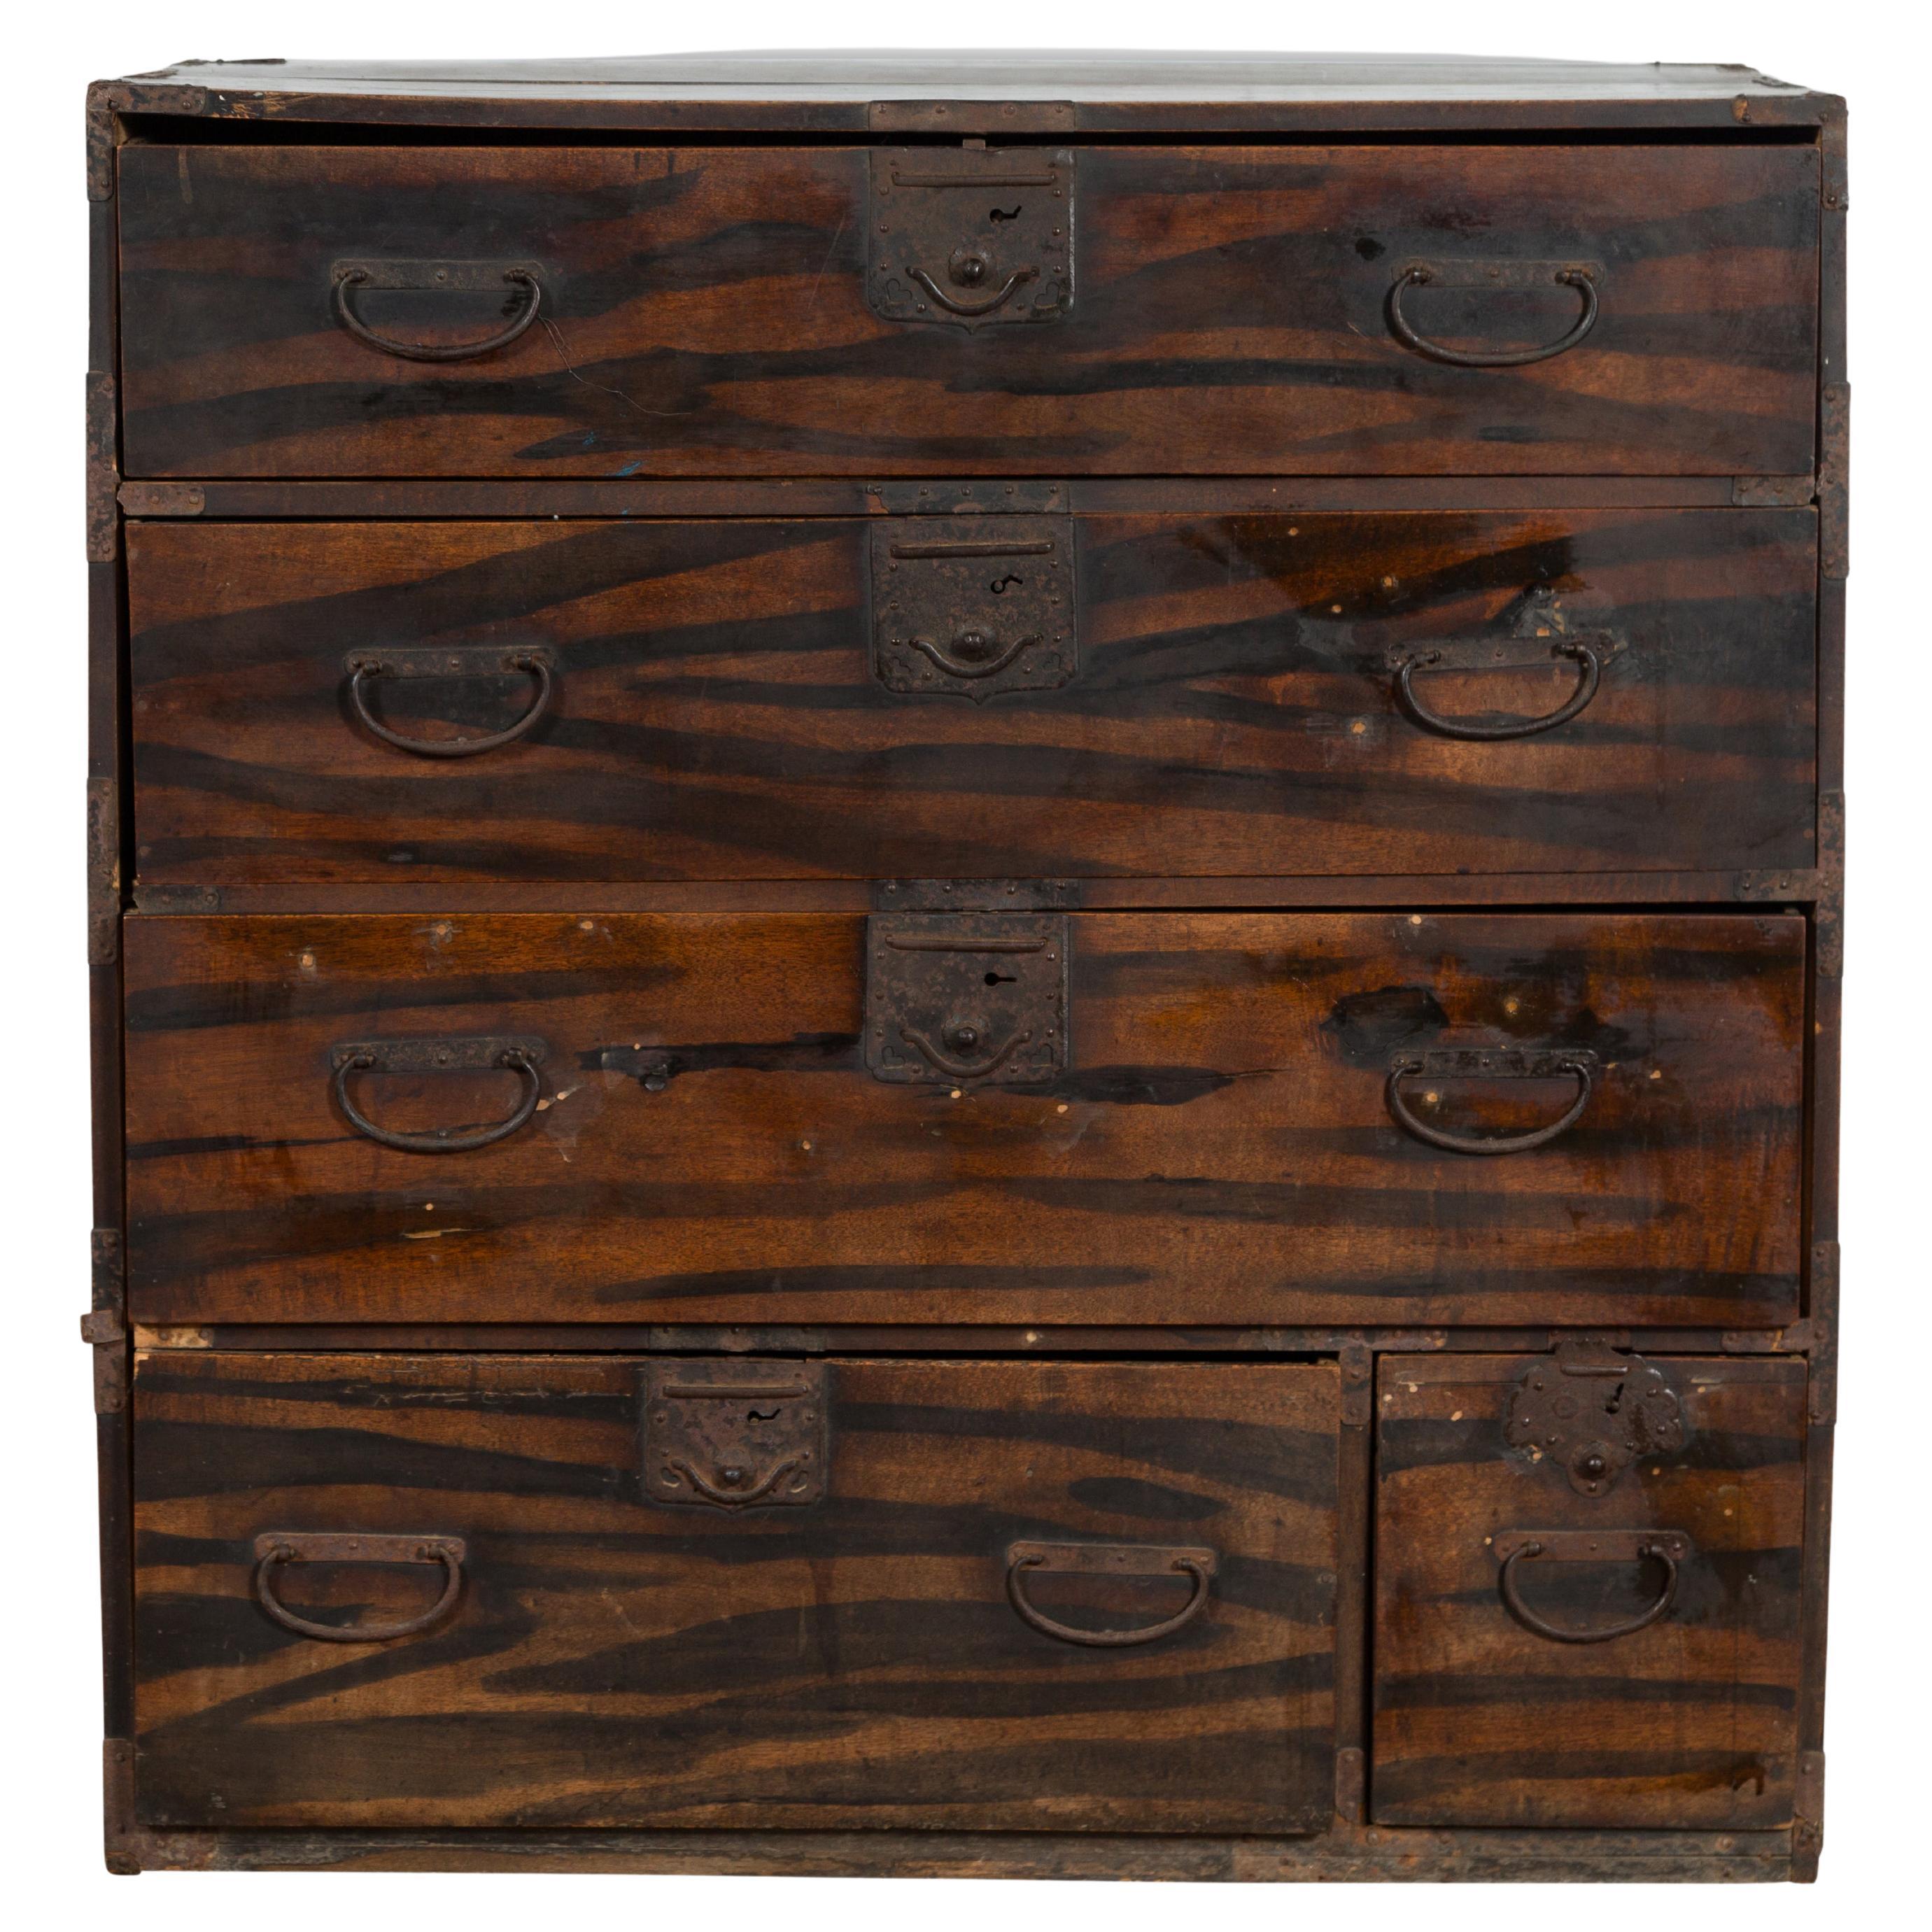 Japanese Meiji Zebra Wood Tansu Chest in Isho-Dansu Style with Five Drawers For Sale